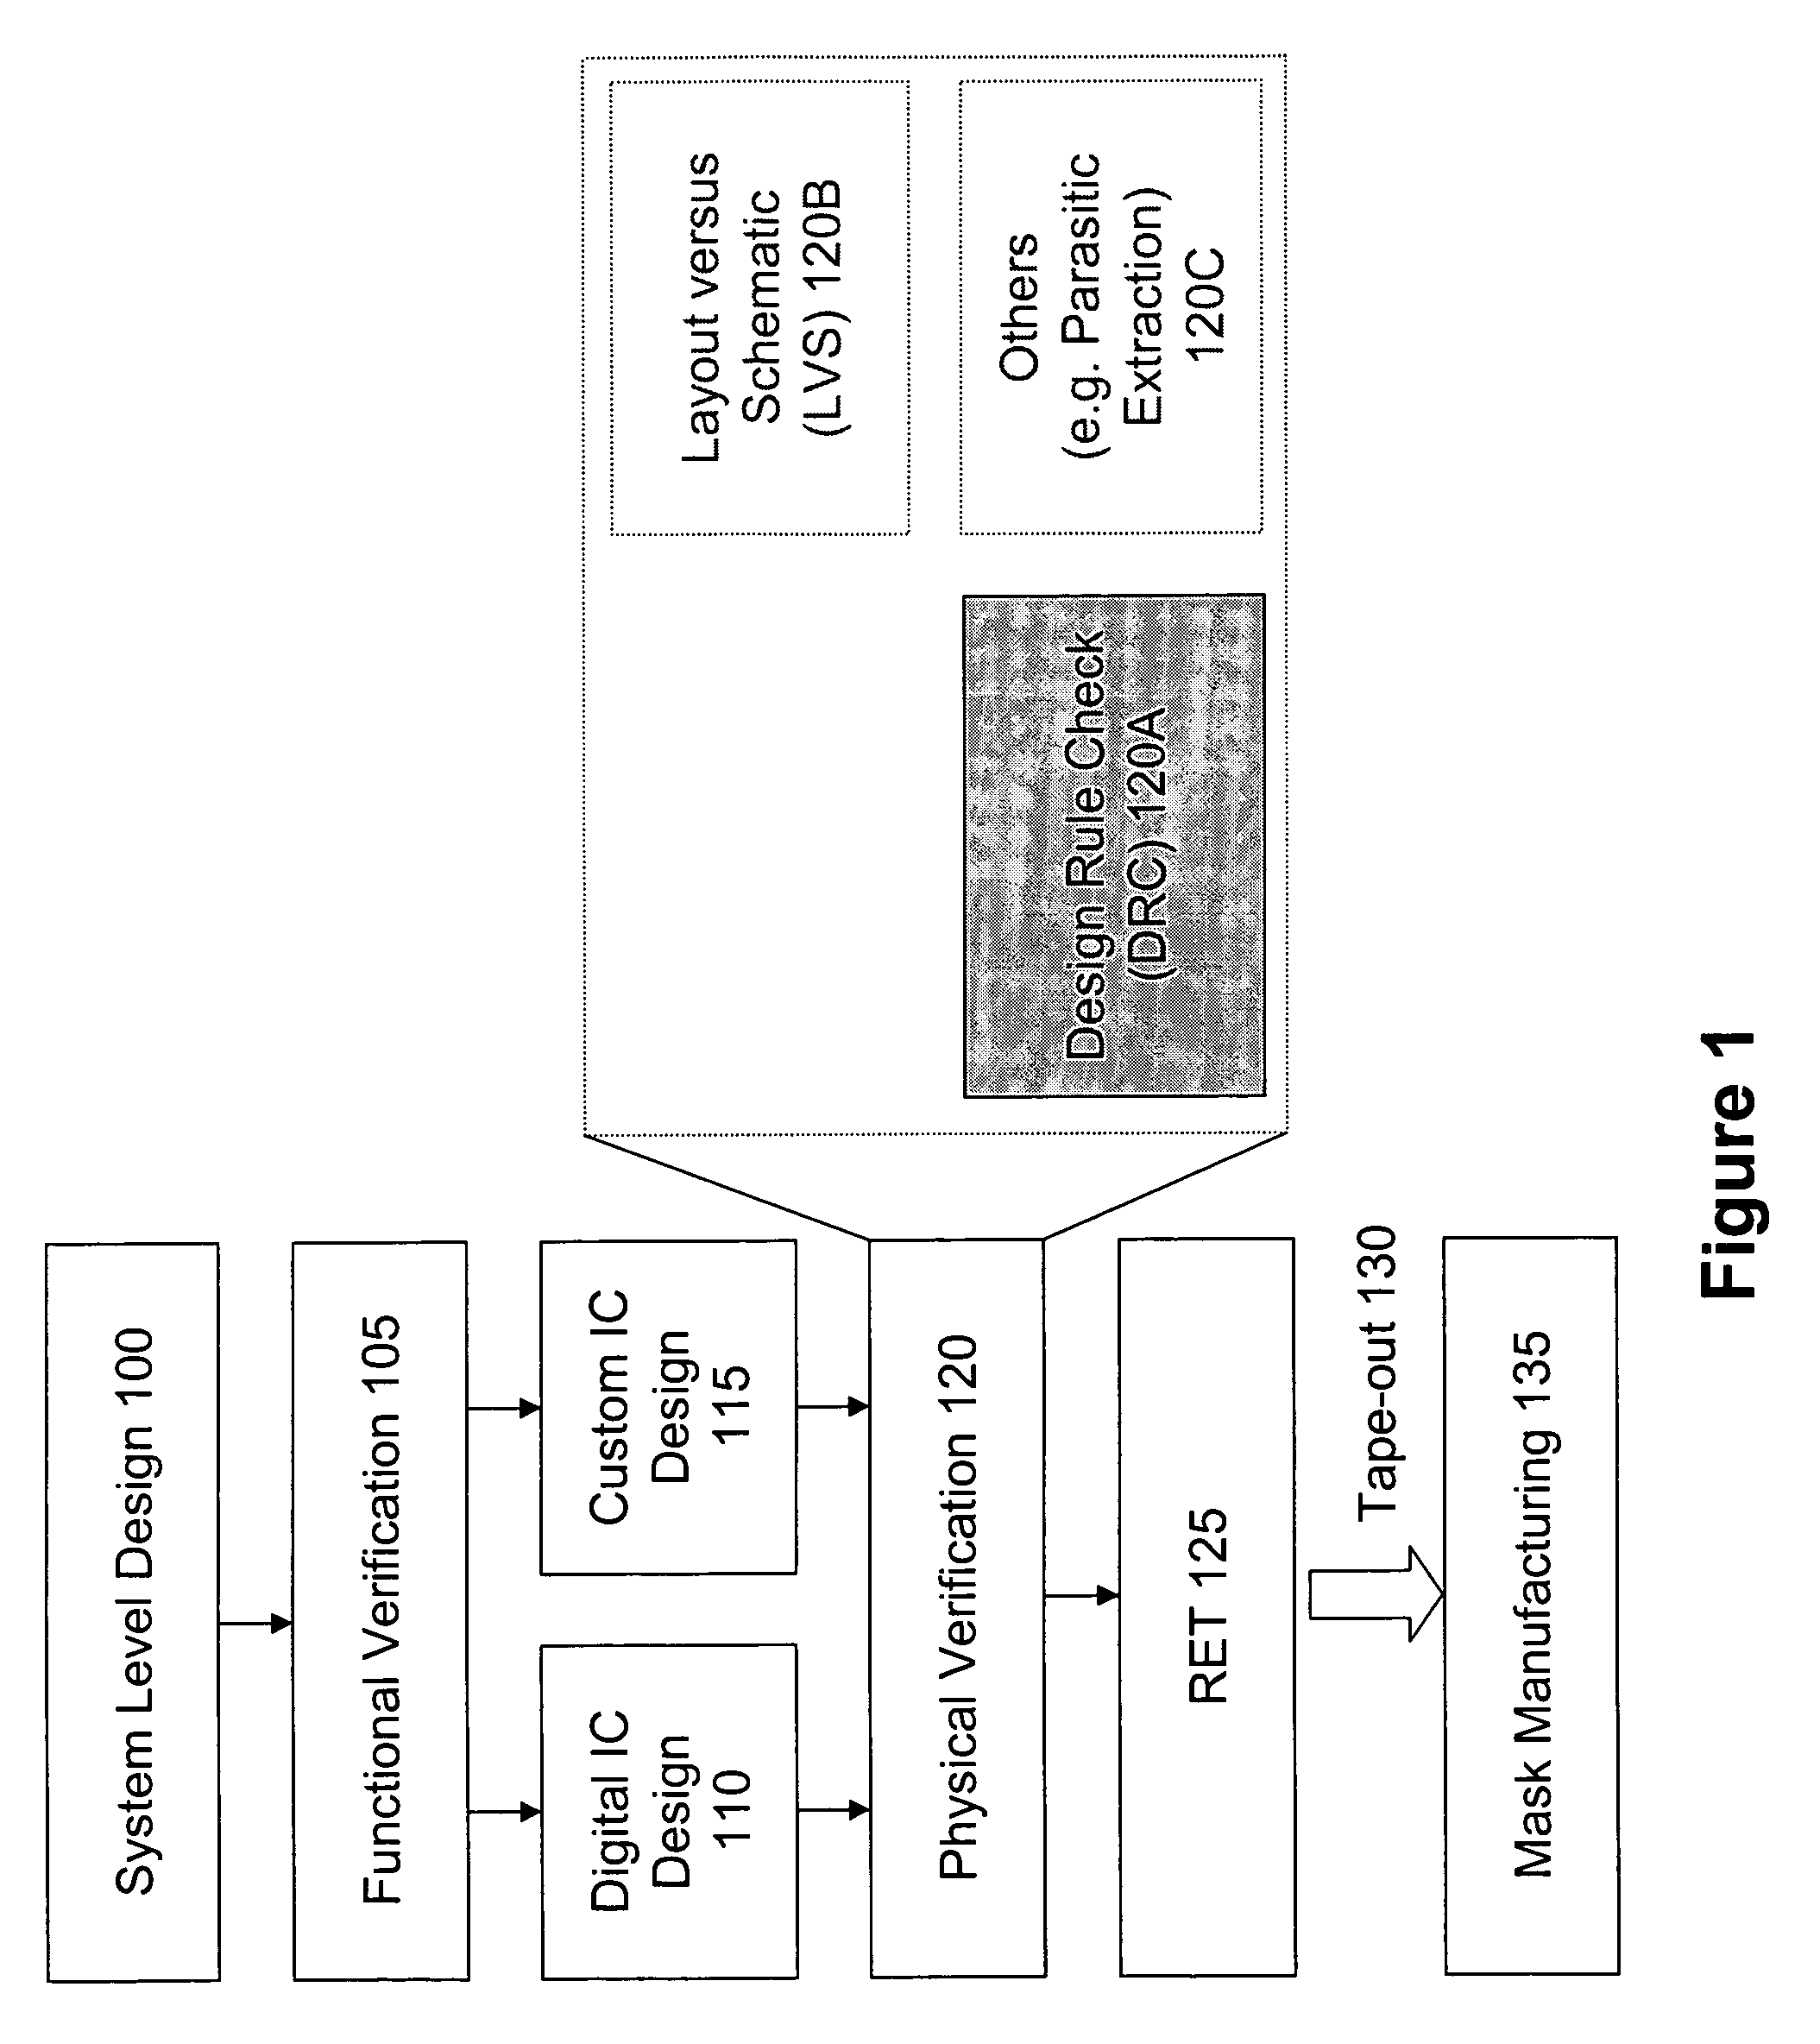 System and method for implementing image-based design rules